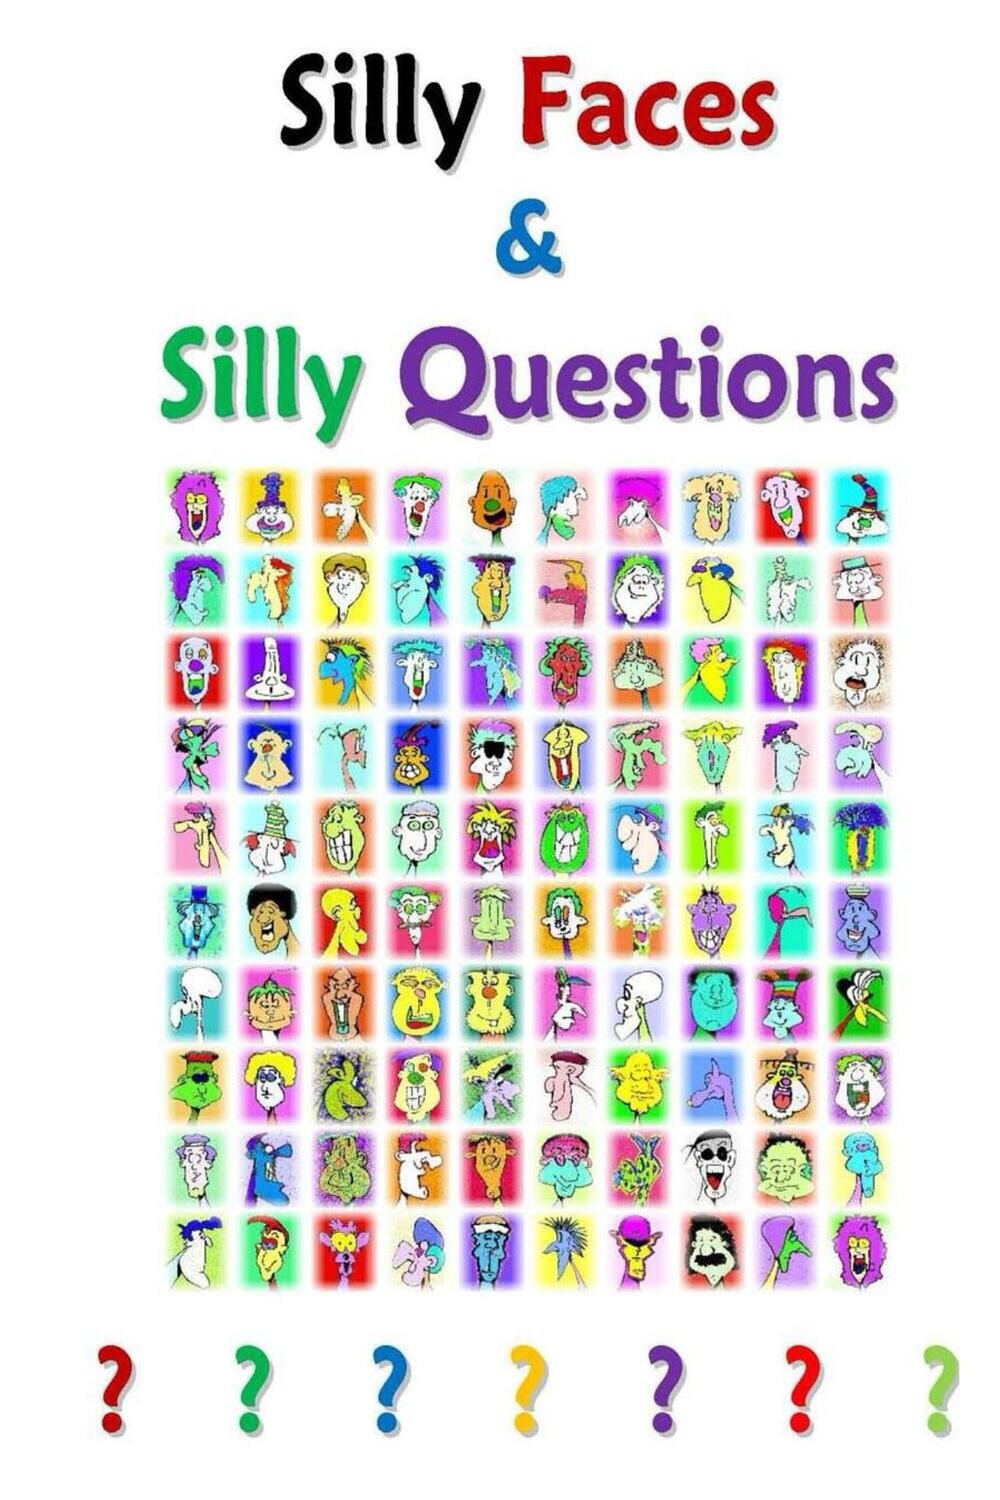 More Silly Faces Books!